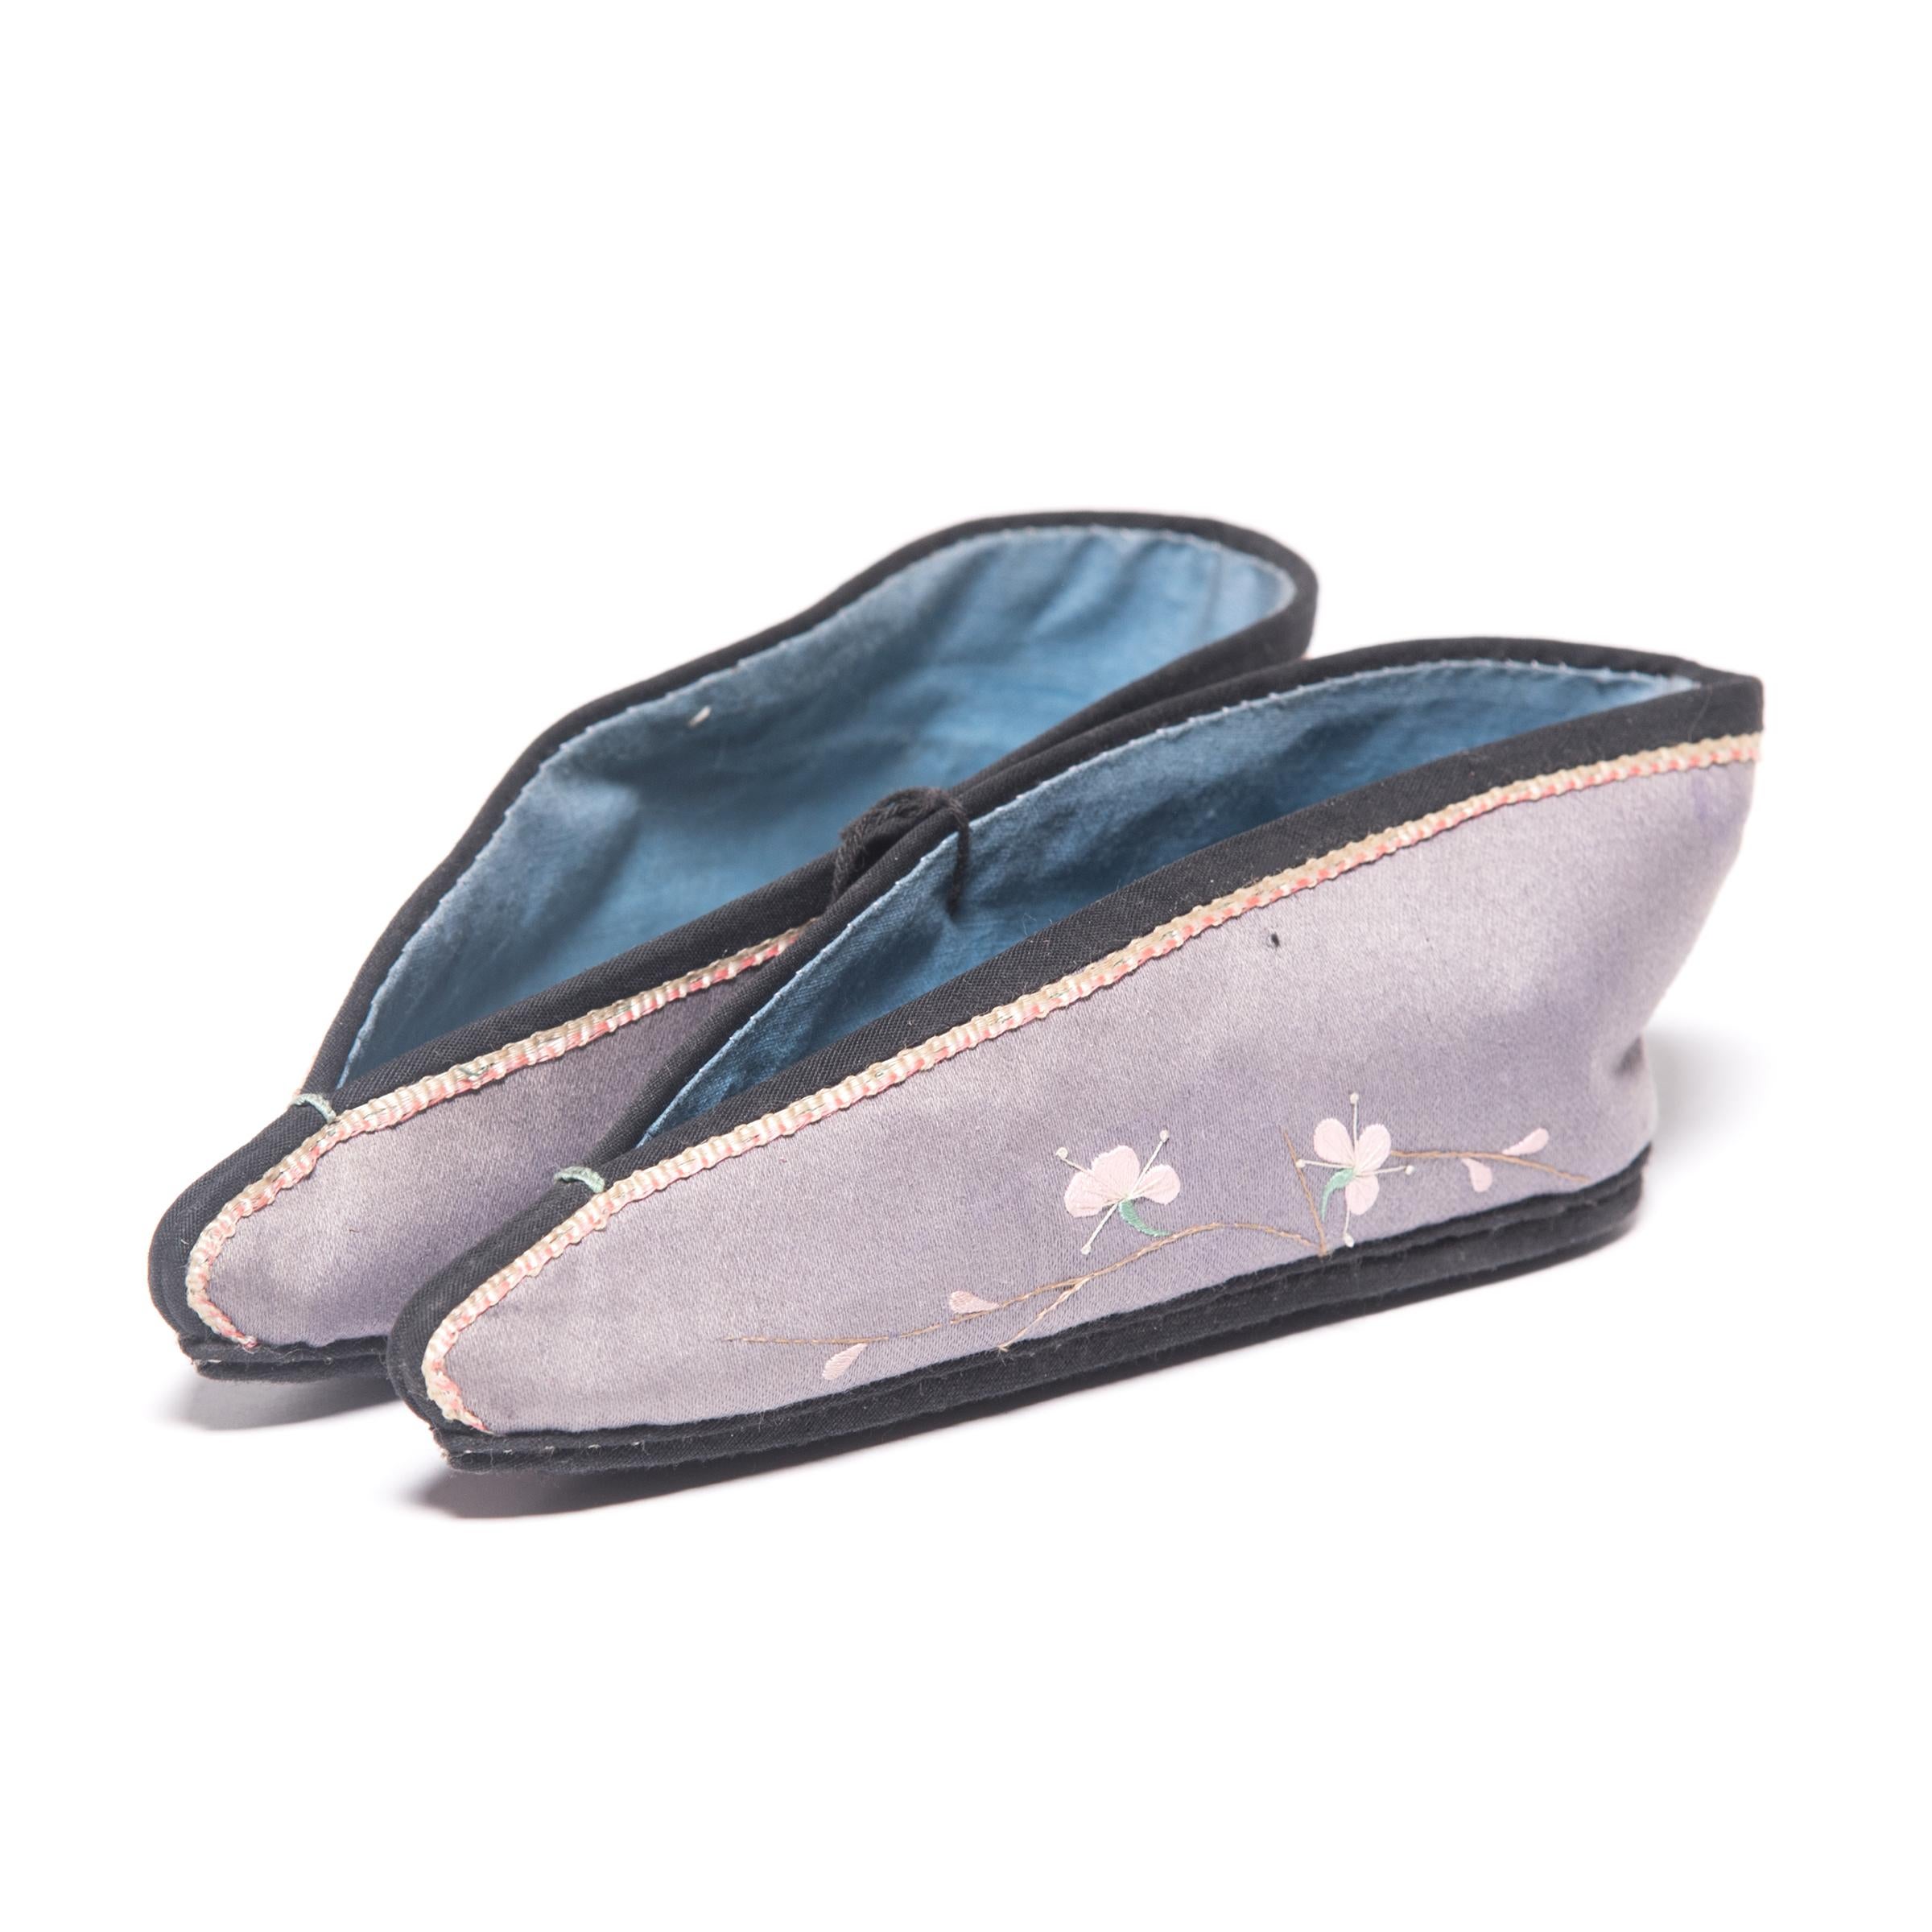 These pointed silk slippers, beautifully embroidered with pink plum blossoms, were shaped to resemble a lotus bud and enhanced the diminutive shape of bound feet. A practice that began in the Tang dynasty and reached the height of its popularity